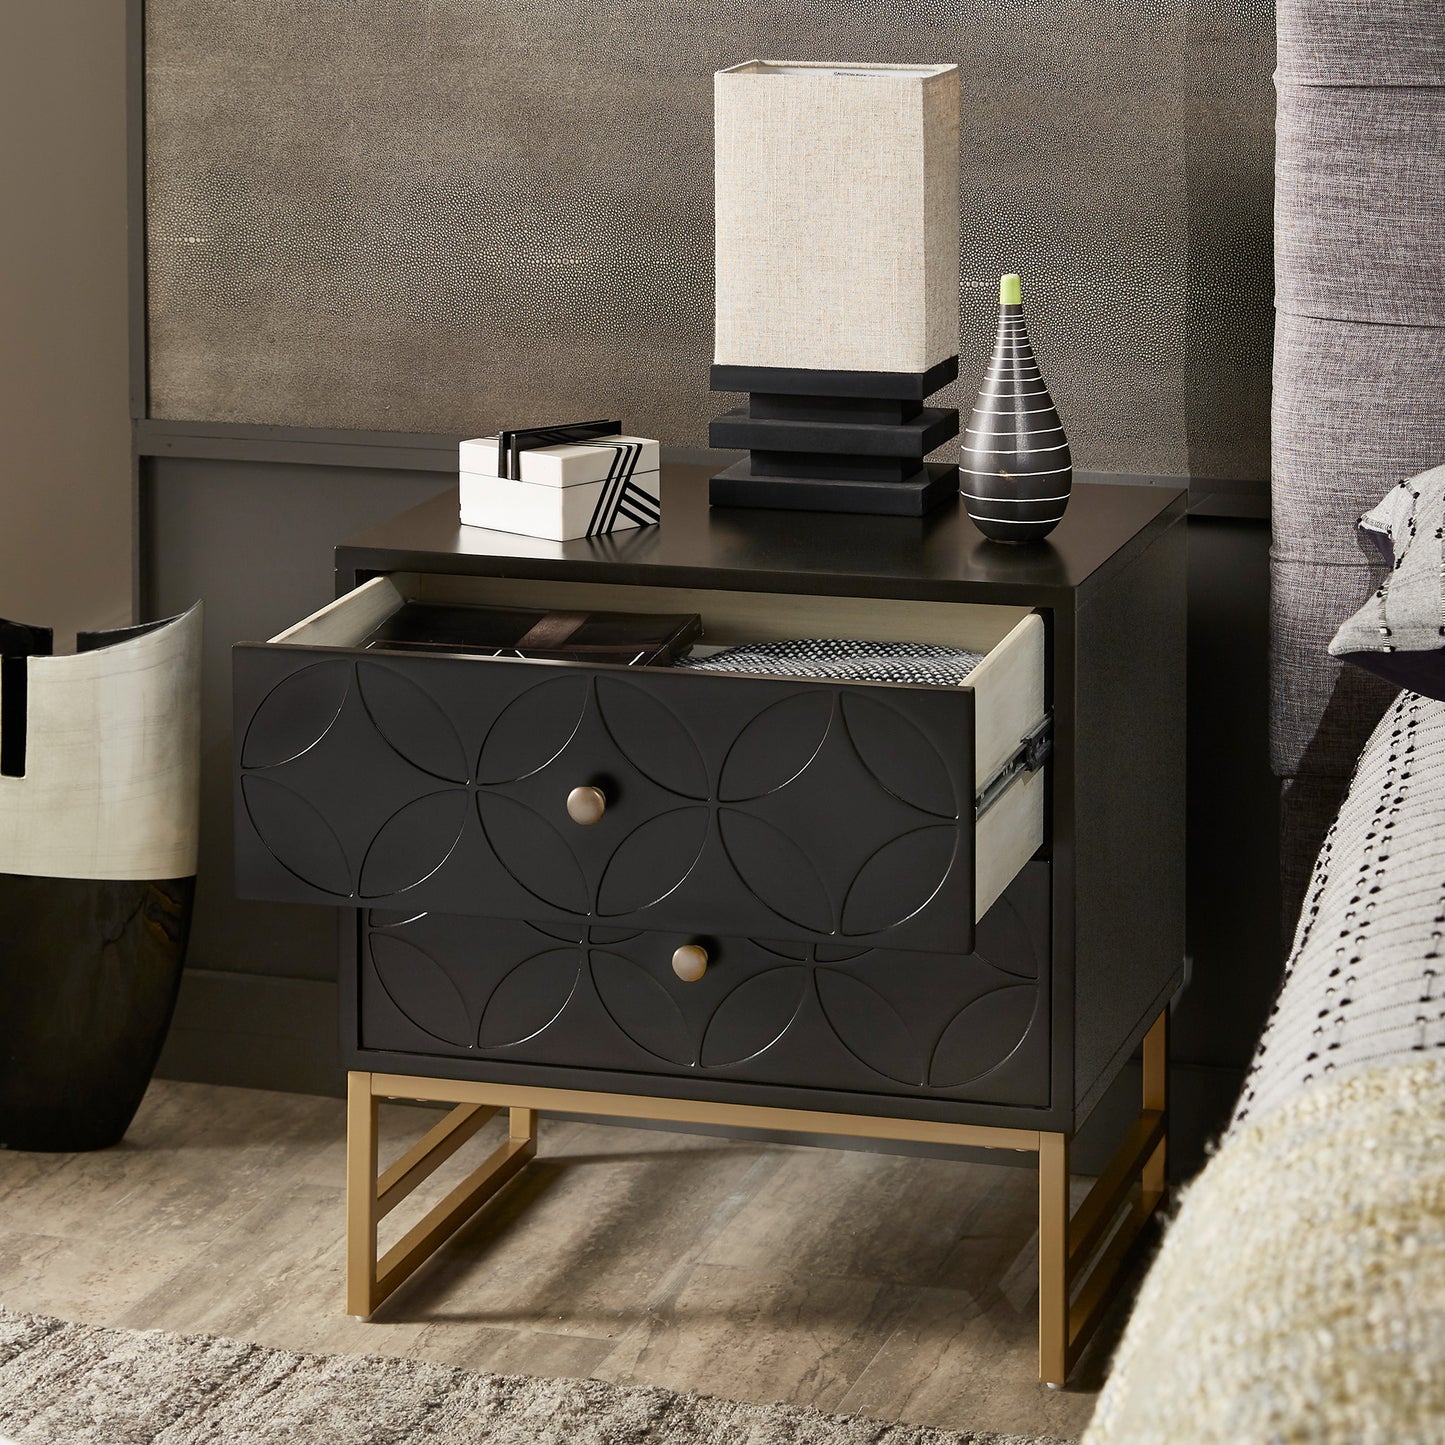 Arched Diamond Gold Metal End Table - Black